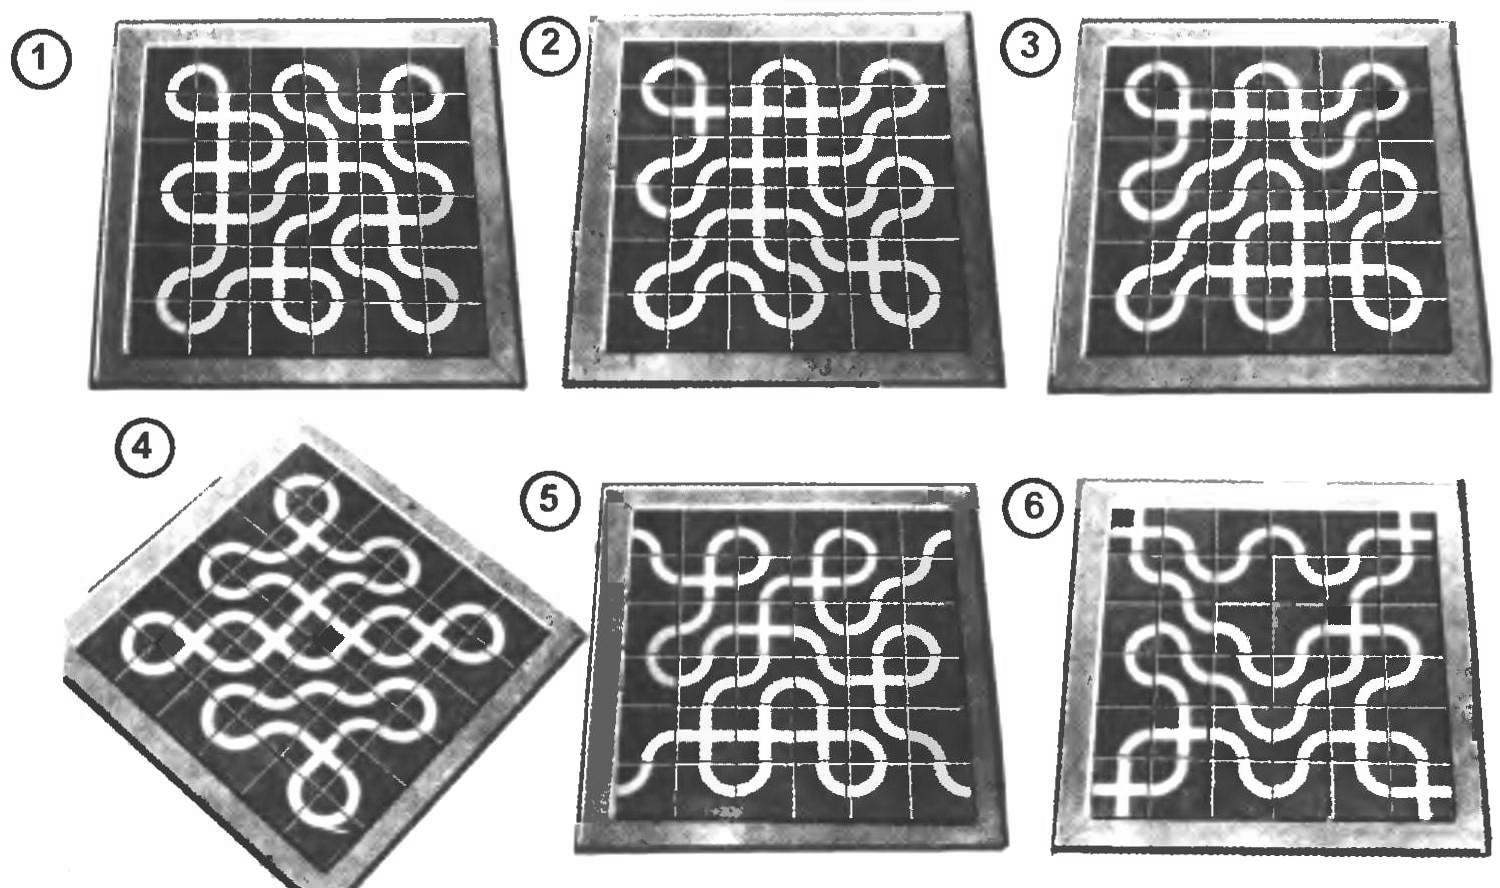 Fig. 3. The options of patterns